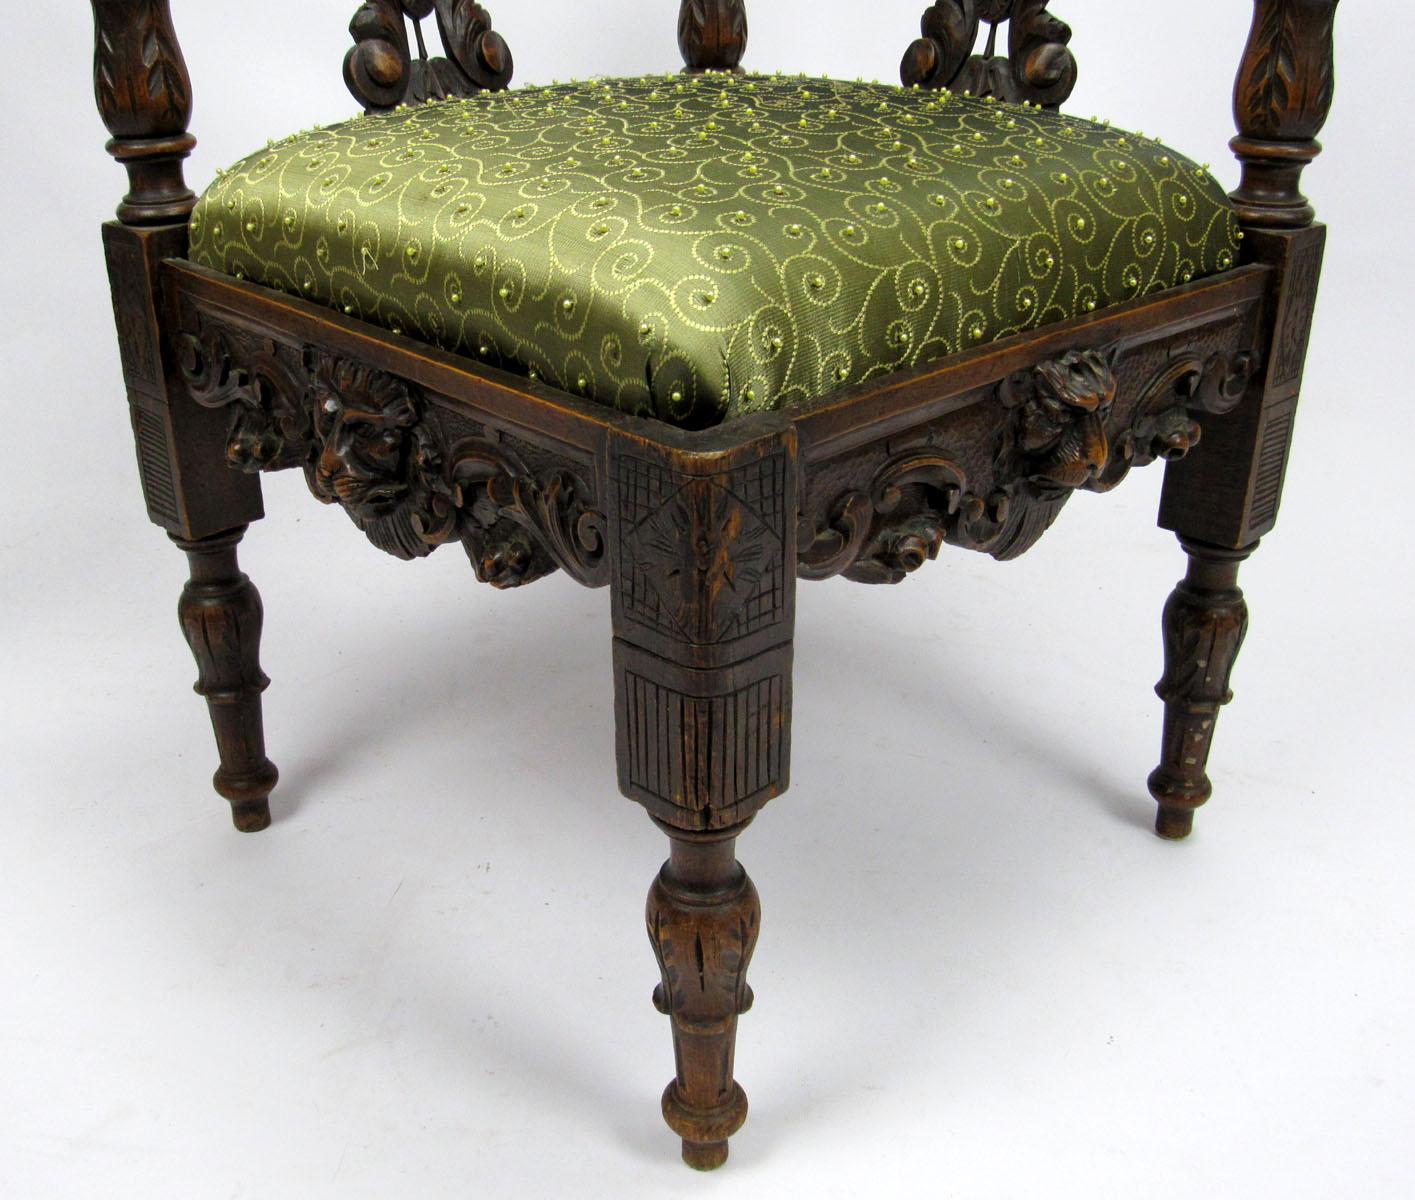 Late 18th or Early 19th Century Italian Desk Chair In Good Condition For Sale In Dallas, TX